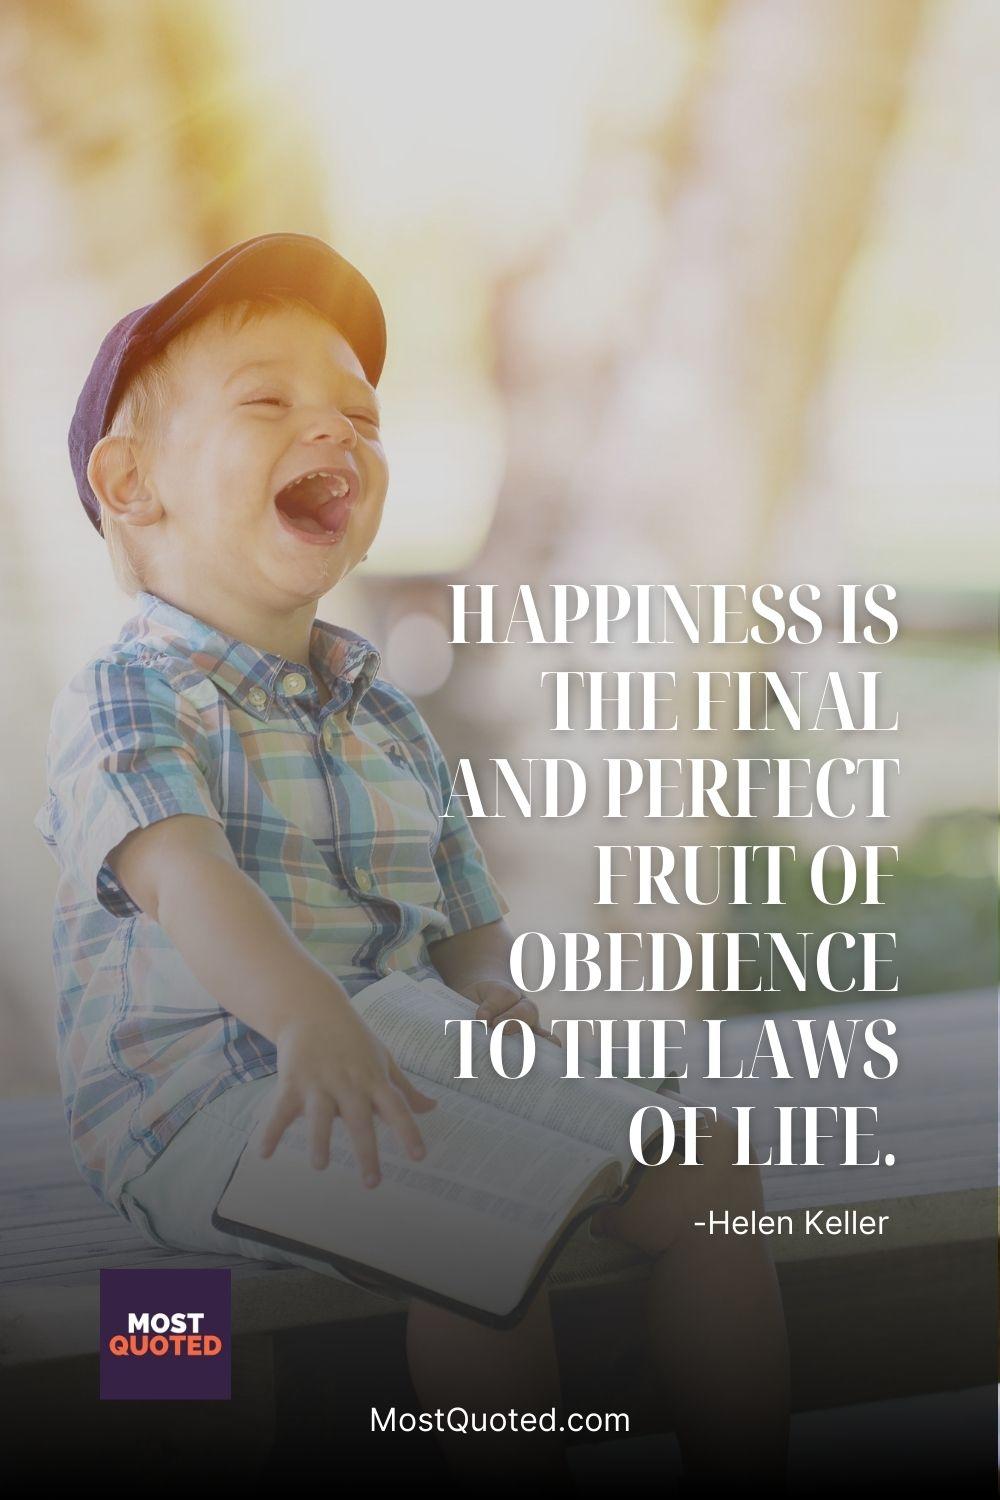 Happiness is the final and perfect fruit of obedience to the laws of life. - Helen Keller